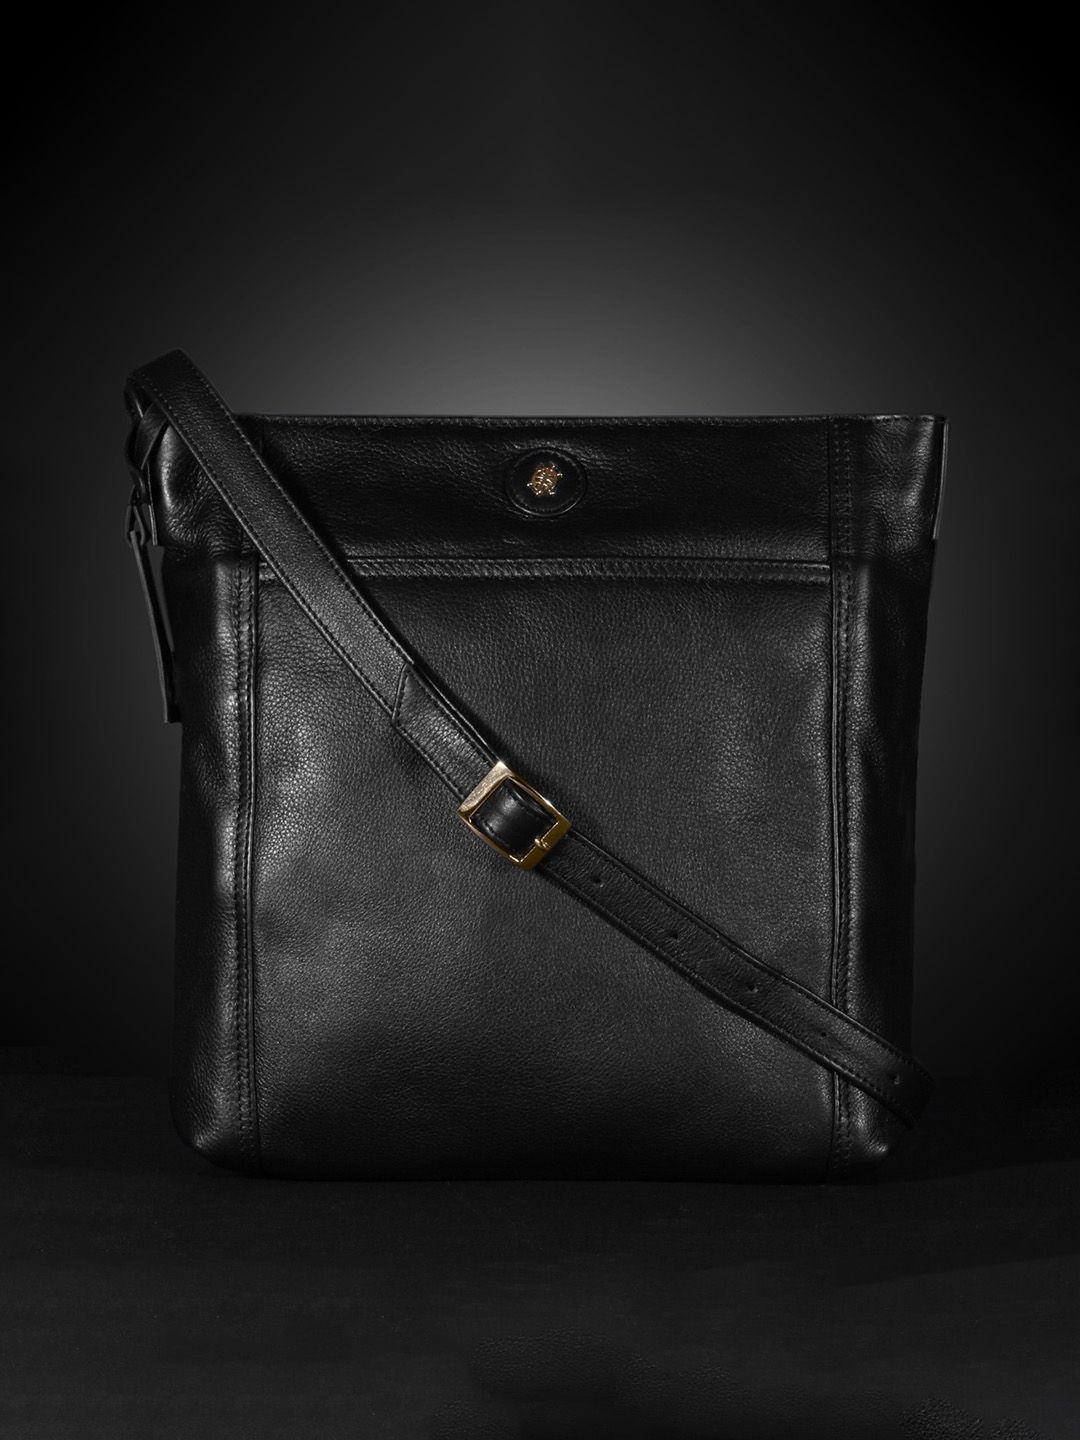 tortoise black leather structured sling bag with cut work